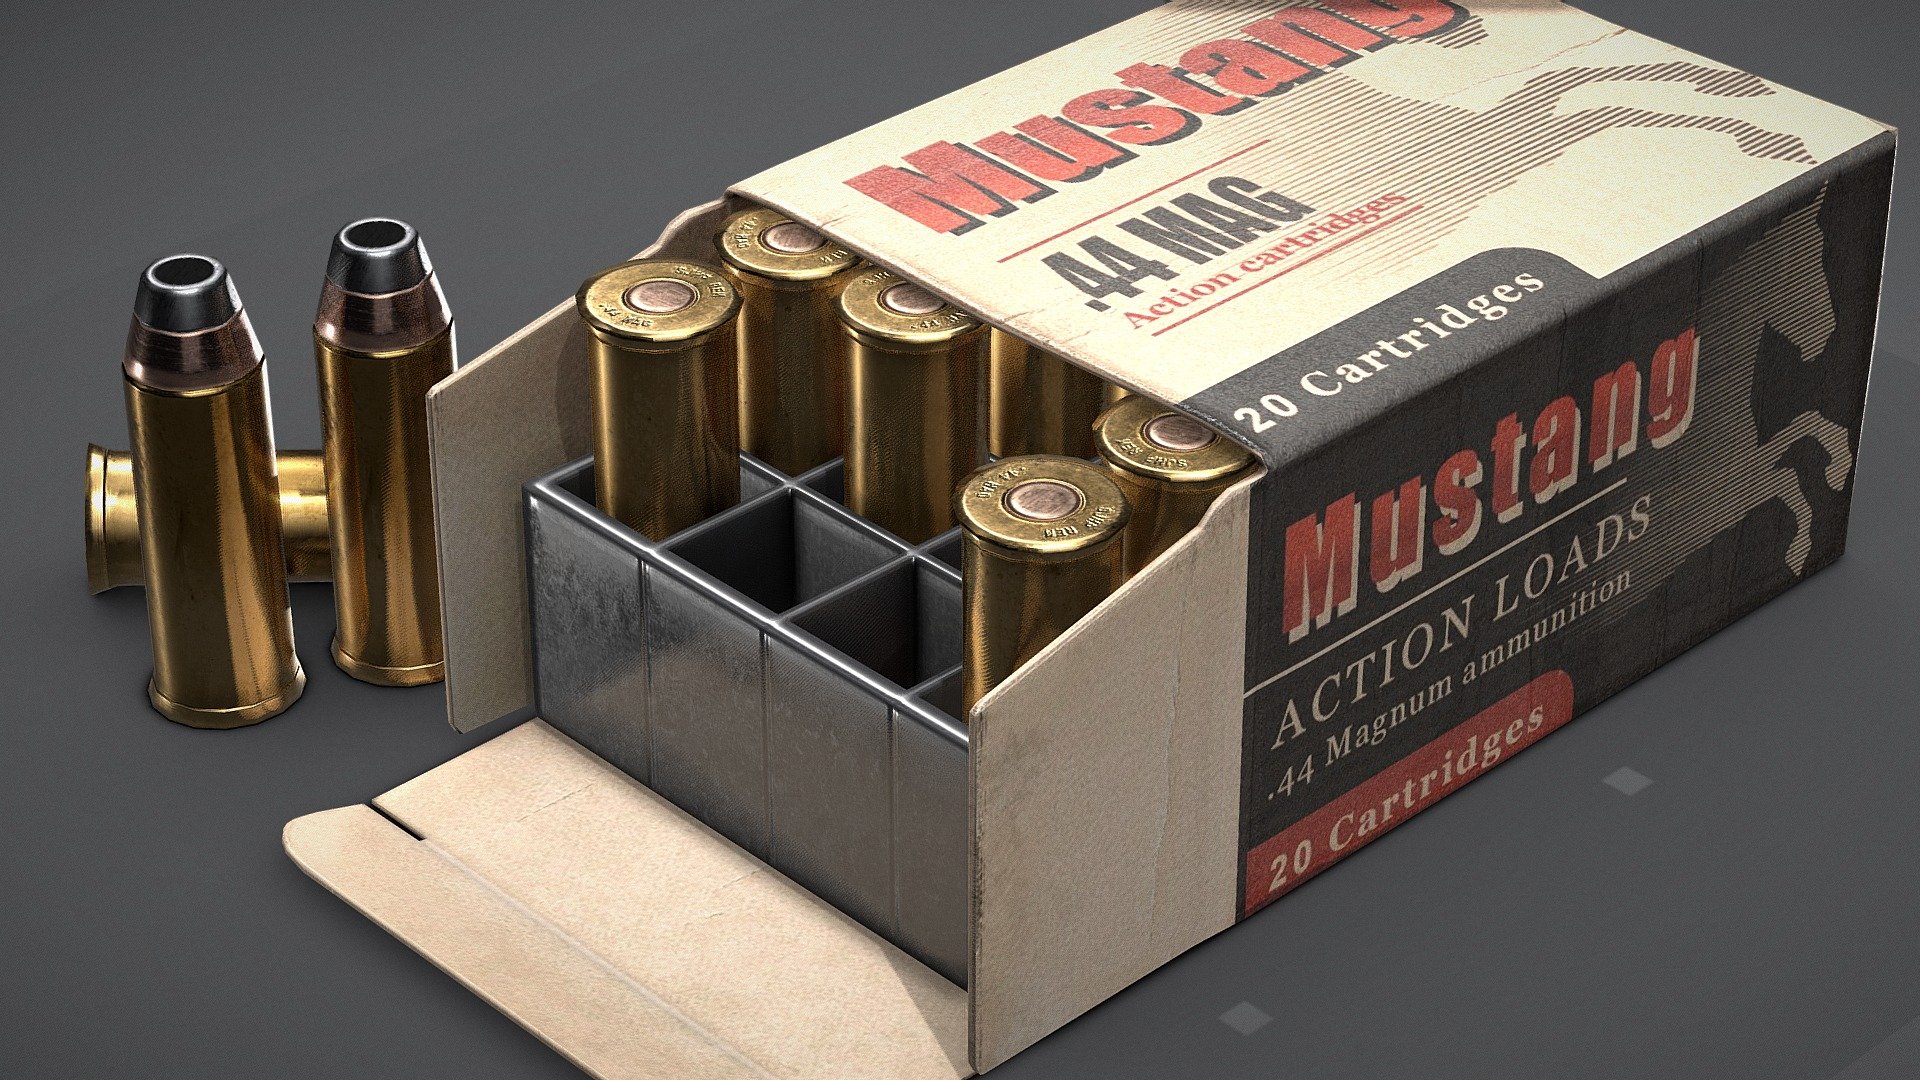 Magnum revolver cartridges ( ammunition pack ) asset with great attention to detail and proper rendering.
Designed specifically for game engines and VR and AR - Comes with Unity &amp; Unreal Engine 4 prepared texture sets! Includes High poly files!



What do you get?


Models:





Magnum cartridges high-poly models (.fbx)




Magnum cartridges low-poly models (.obj, .fbx) :






Bullet / Cartridge 108 tris

Box Insert 448 tris

Cartboard box 488 tris

Opened pistol cartboard box with insert and projectiles 2280 tris

Unity Standard Shader textures :





Albedo 2048x2048




Normal 2048x2048




Specular 2048x2048




Ambient Oclussion 2048x2048



UE4 textures :





Albedo 2048x2048 




Normal 2048x2048 




RMA (channel packed texture) 2048x2048



VR / AR / Low-poly / Game ready / Magnum / Revolver / Handgun / Pistol cartridges / ammunition pack 3D MODEL - Magnum revolver ammo  - PBR - Game-ready model - Buy Royalty Free 3D model by miloszgierczak 3d model